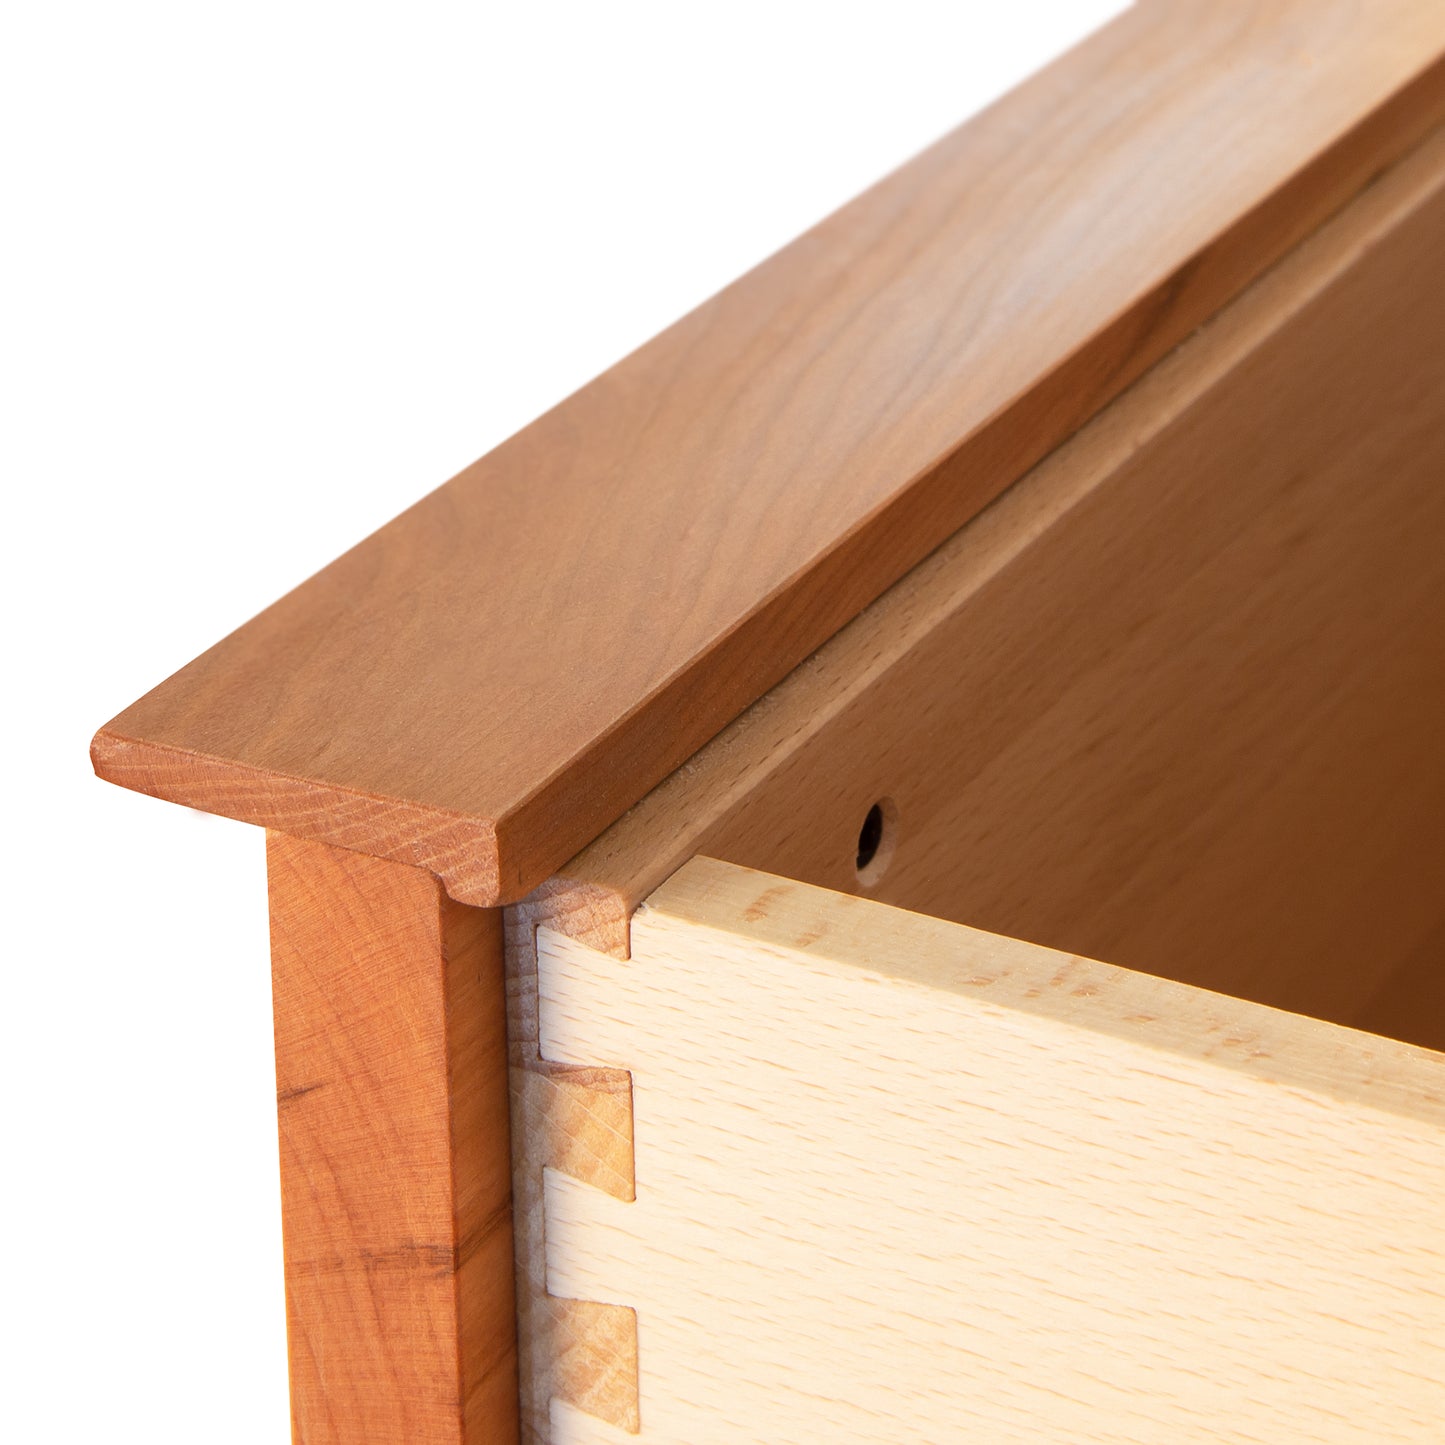 A close-up view of the Vermont Furniture Designs Kipling 3-Drawer Nightstand showing dovetail joint details in natural cherry.